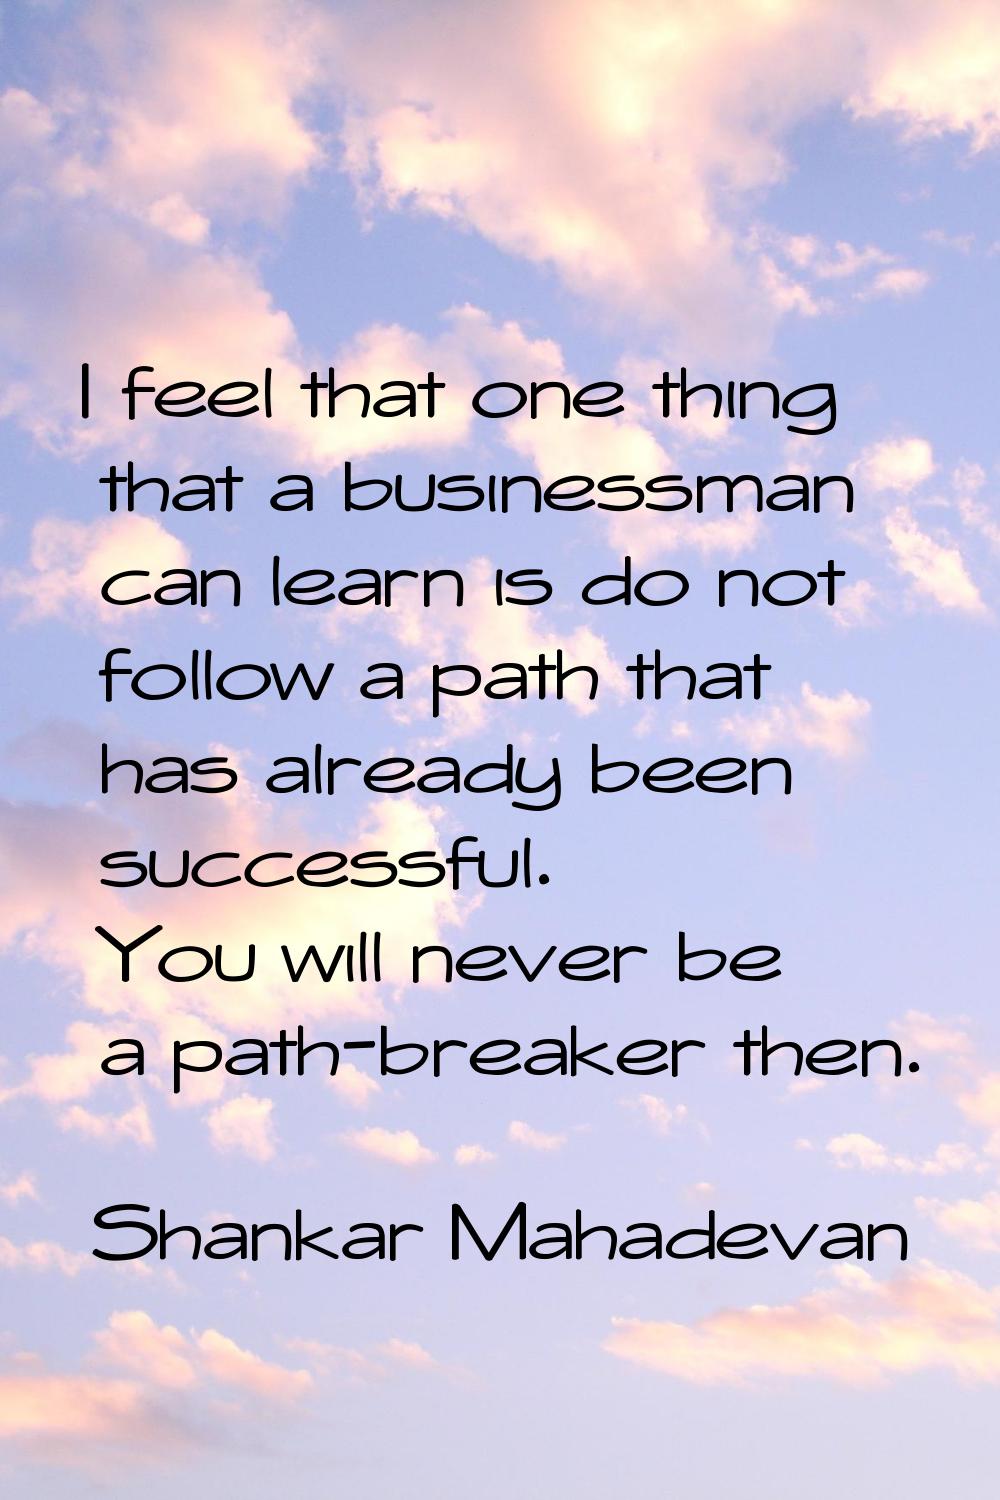 I feel that one thing that a businessman can learn is do not follow a path that has already been su